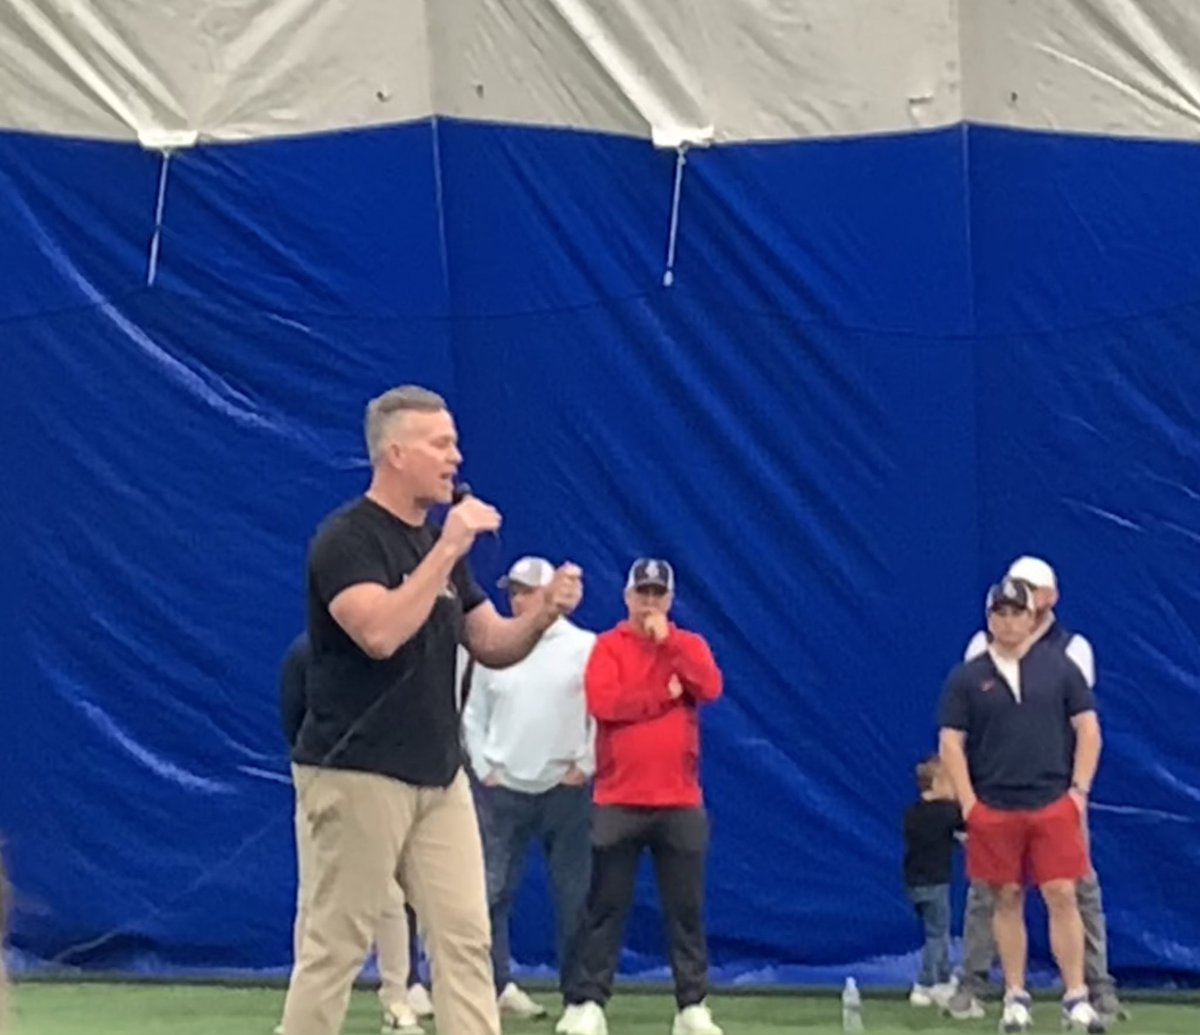 Thanks to @hardcoreelitepa and Brian Graham for hosting one of the greats - Sean Casey, @TheMayorsOffice . Powerful messages today! #YOUvsYOU #WhyNotMe Breakthrough-Pro.com